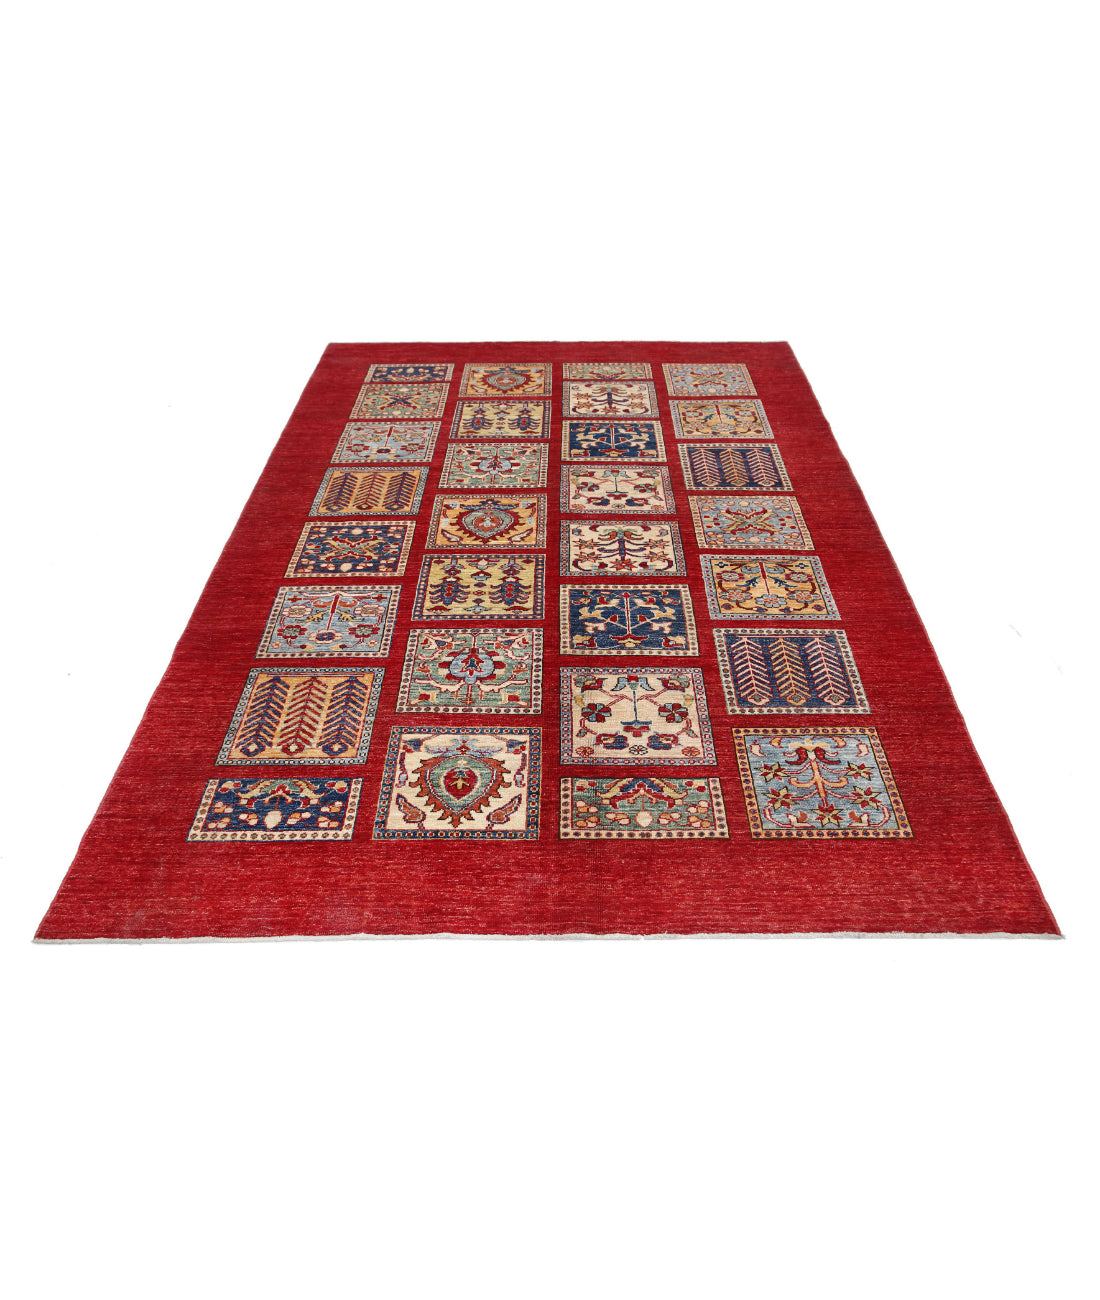 Hand Knotted Bakhtiari Wool Rug - 5'9'' x 8'0'' 5'9'' x 8'0'' (173 X 240) / Red / Red